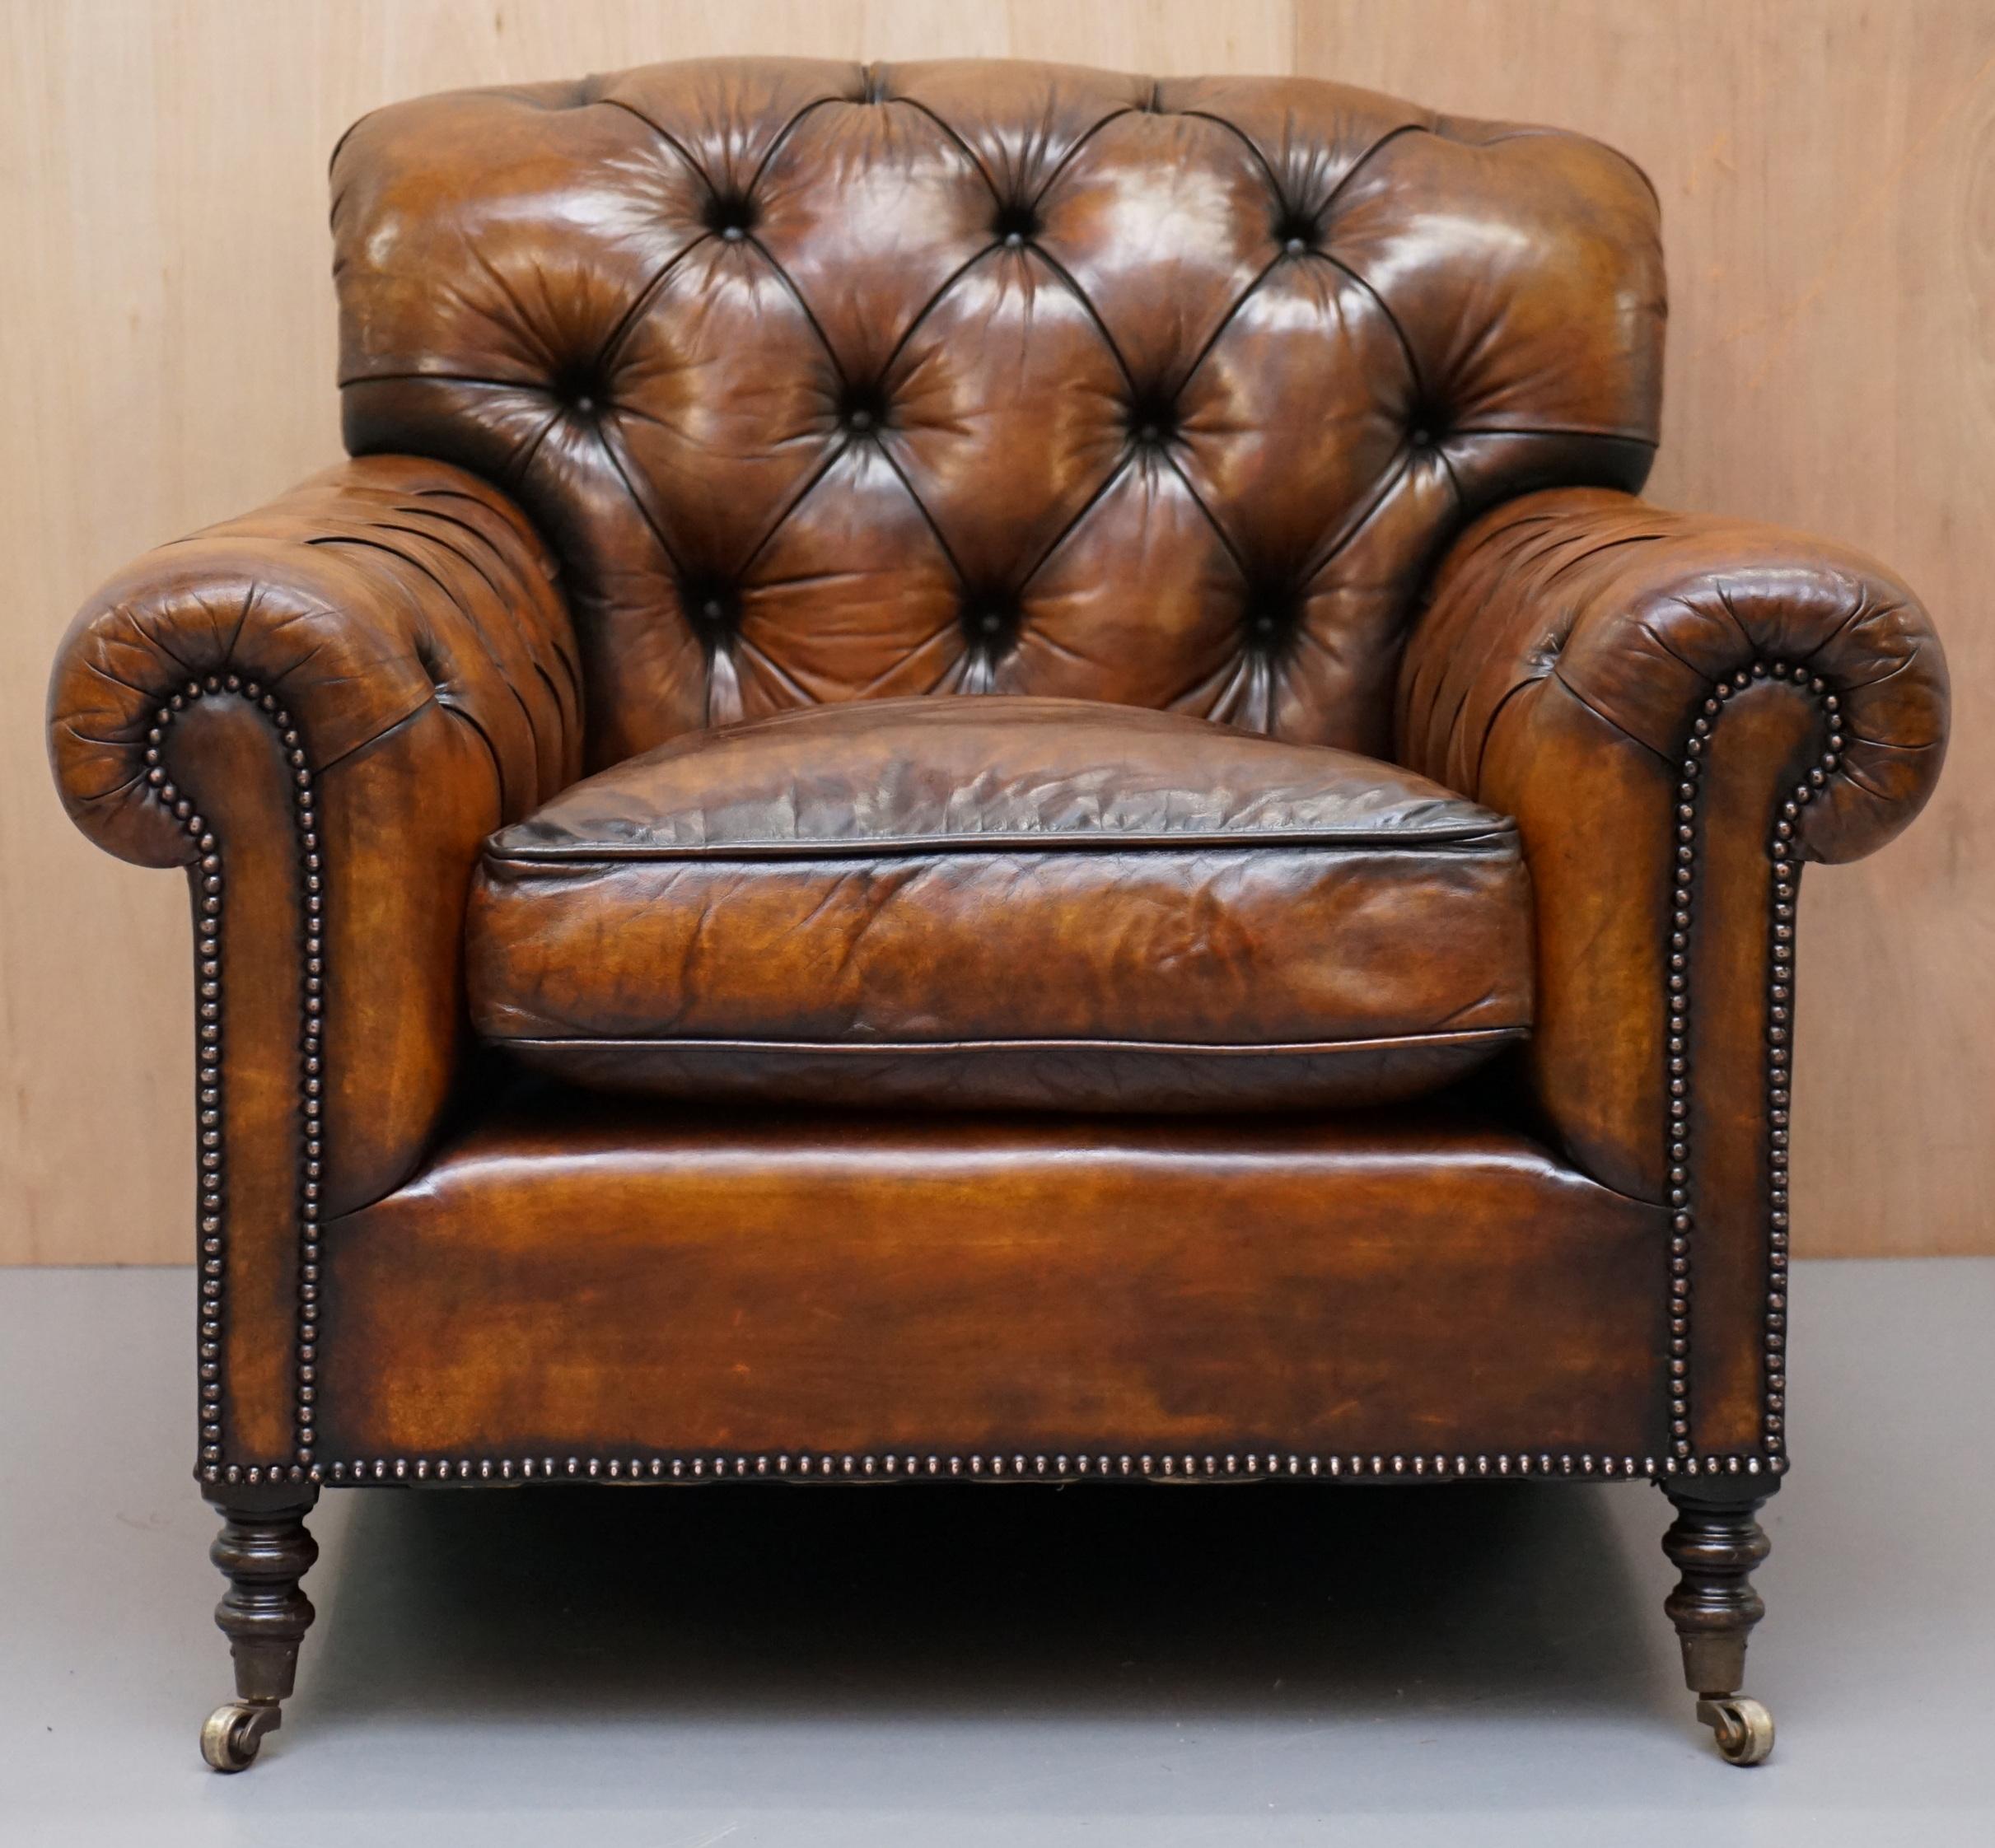 We are delighted to this fully restored George Smith Bulgari lounge armchair with Chesterfield buttoning RRP £7000

A very good looking and well made armchair, George Smith make some of the finest hand made in England leather seating available